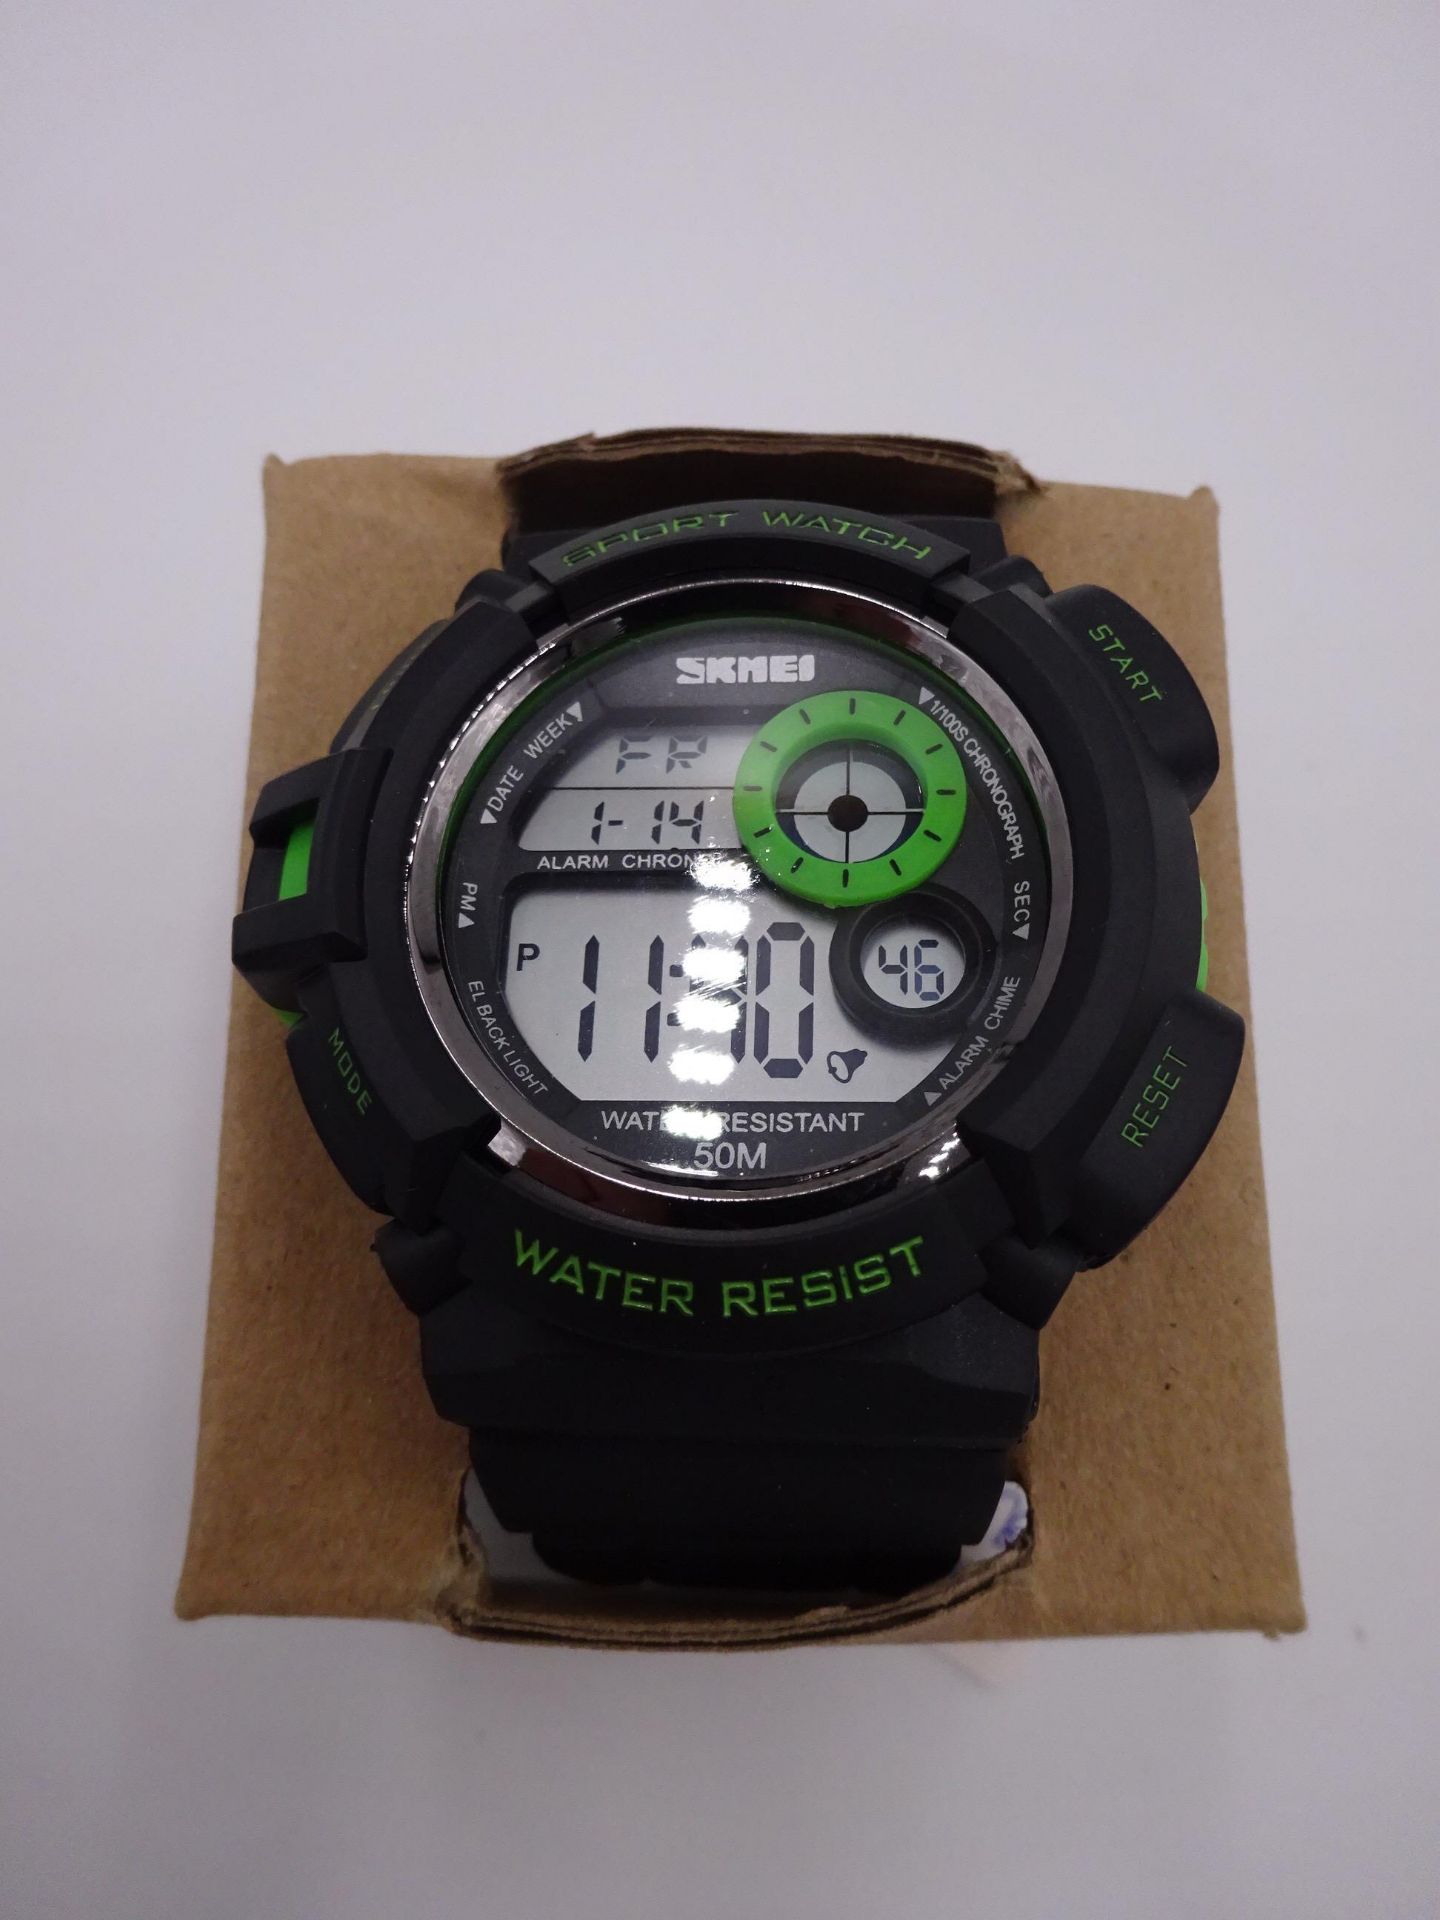 New Sport watch water resist black strap with hints of green digital.